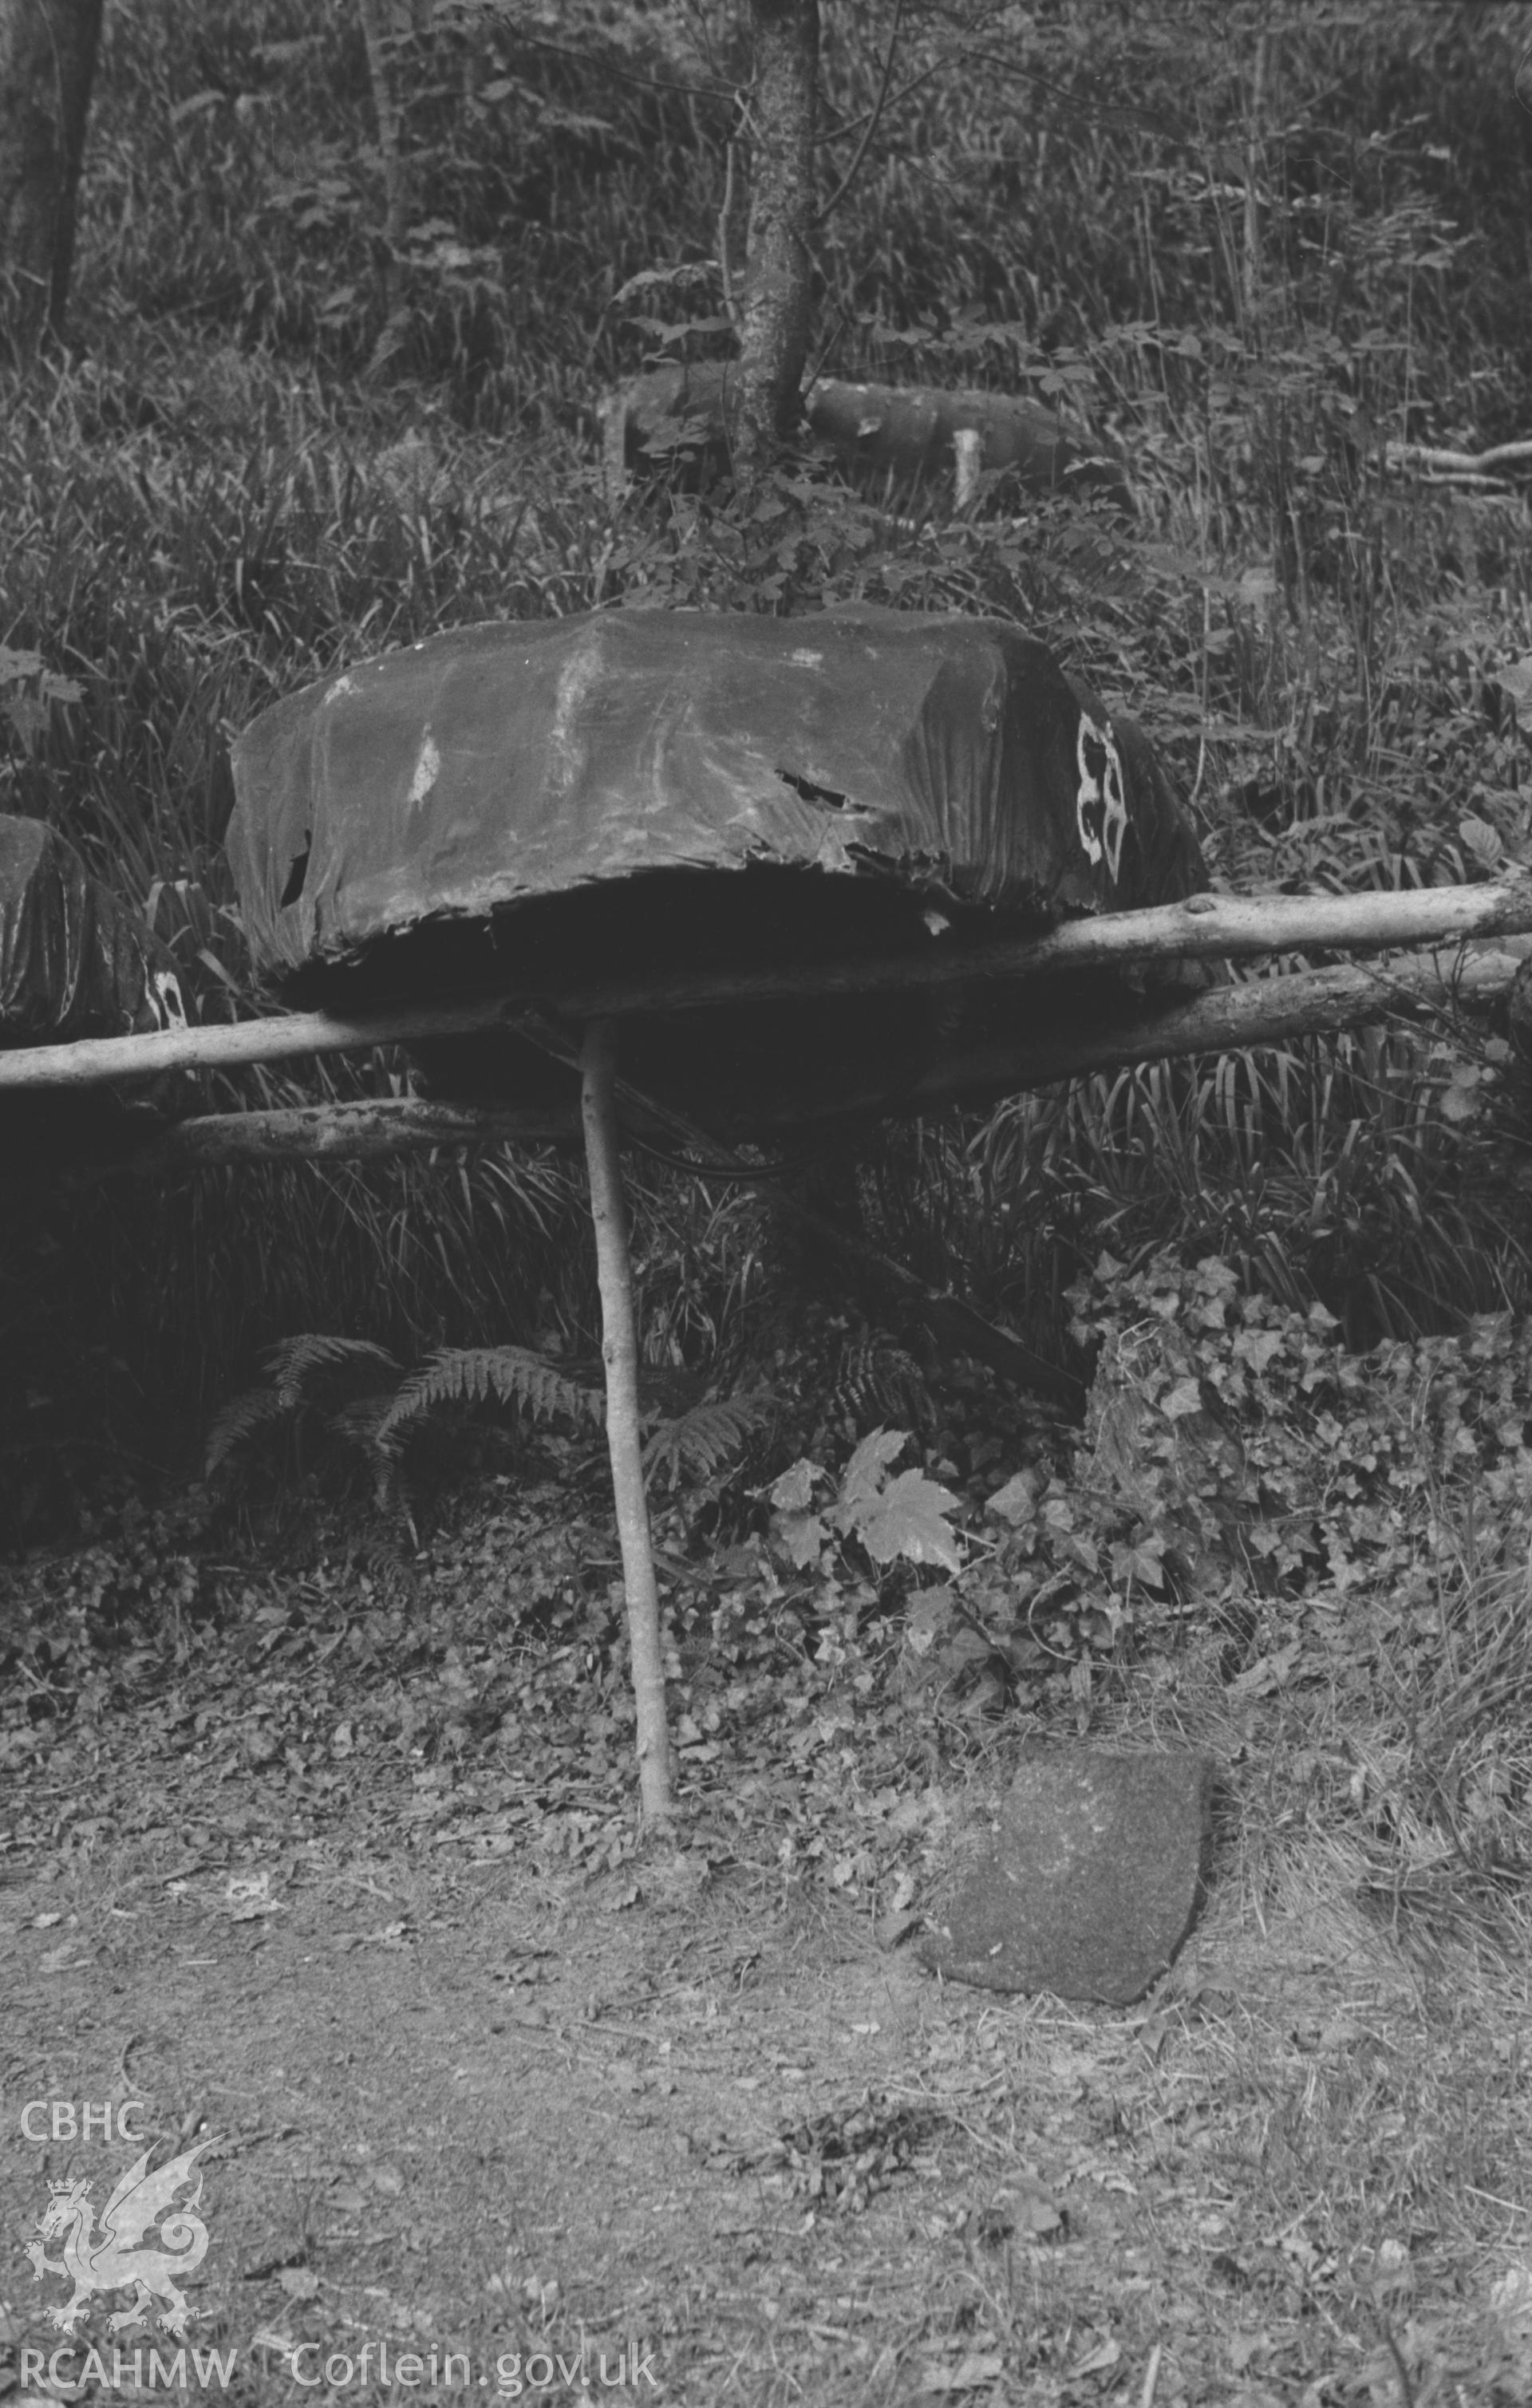 Digital copy of a black and white negative showing coracles on the east bank of the Teifi at Cwm Du, 1.5km north of Cilgerran. Photographed by Arthur O. Chater in September 1964 from Grid Reference SN 1943 4447.